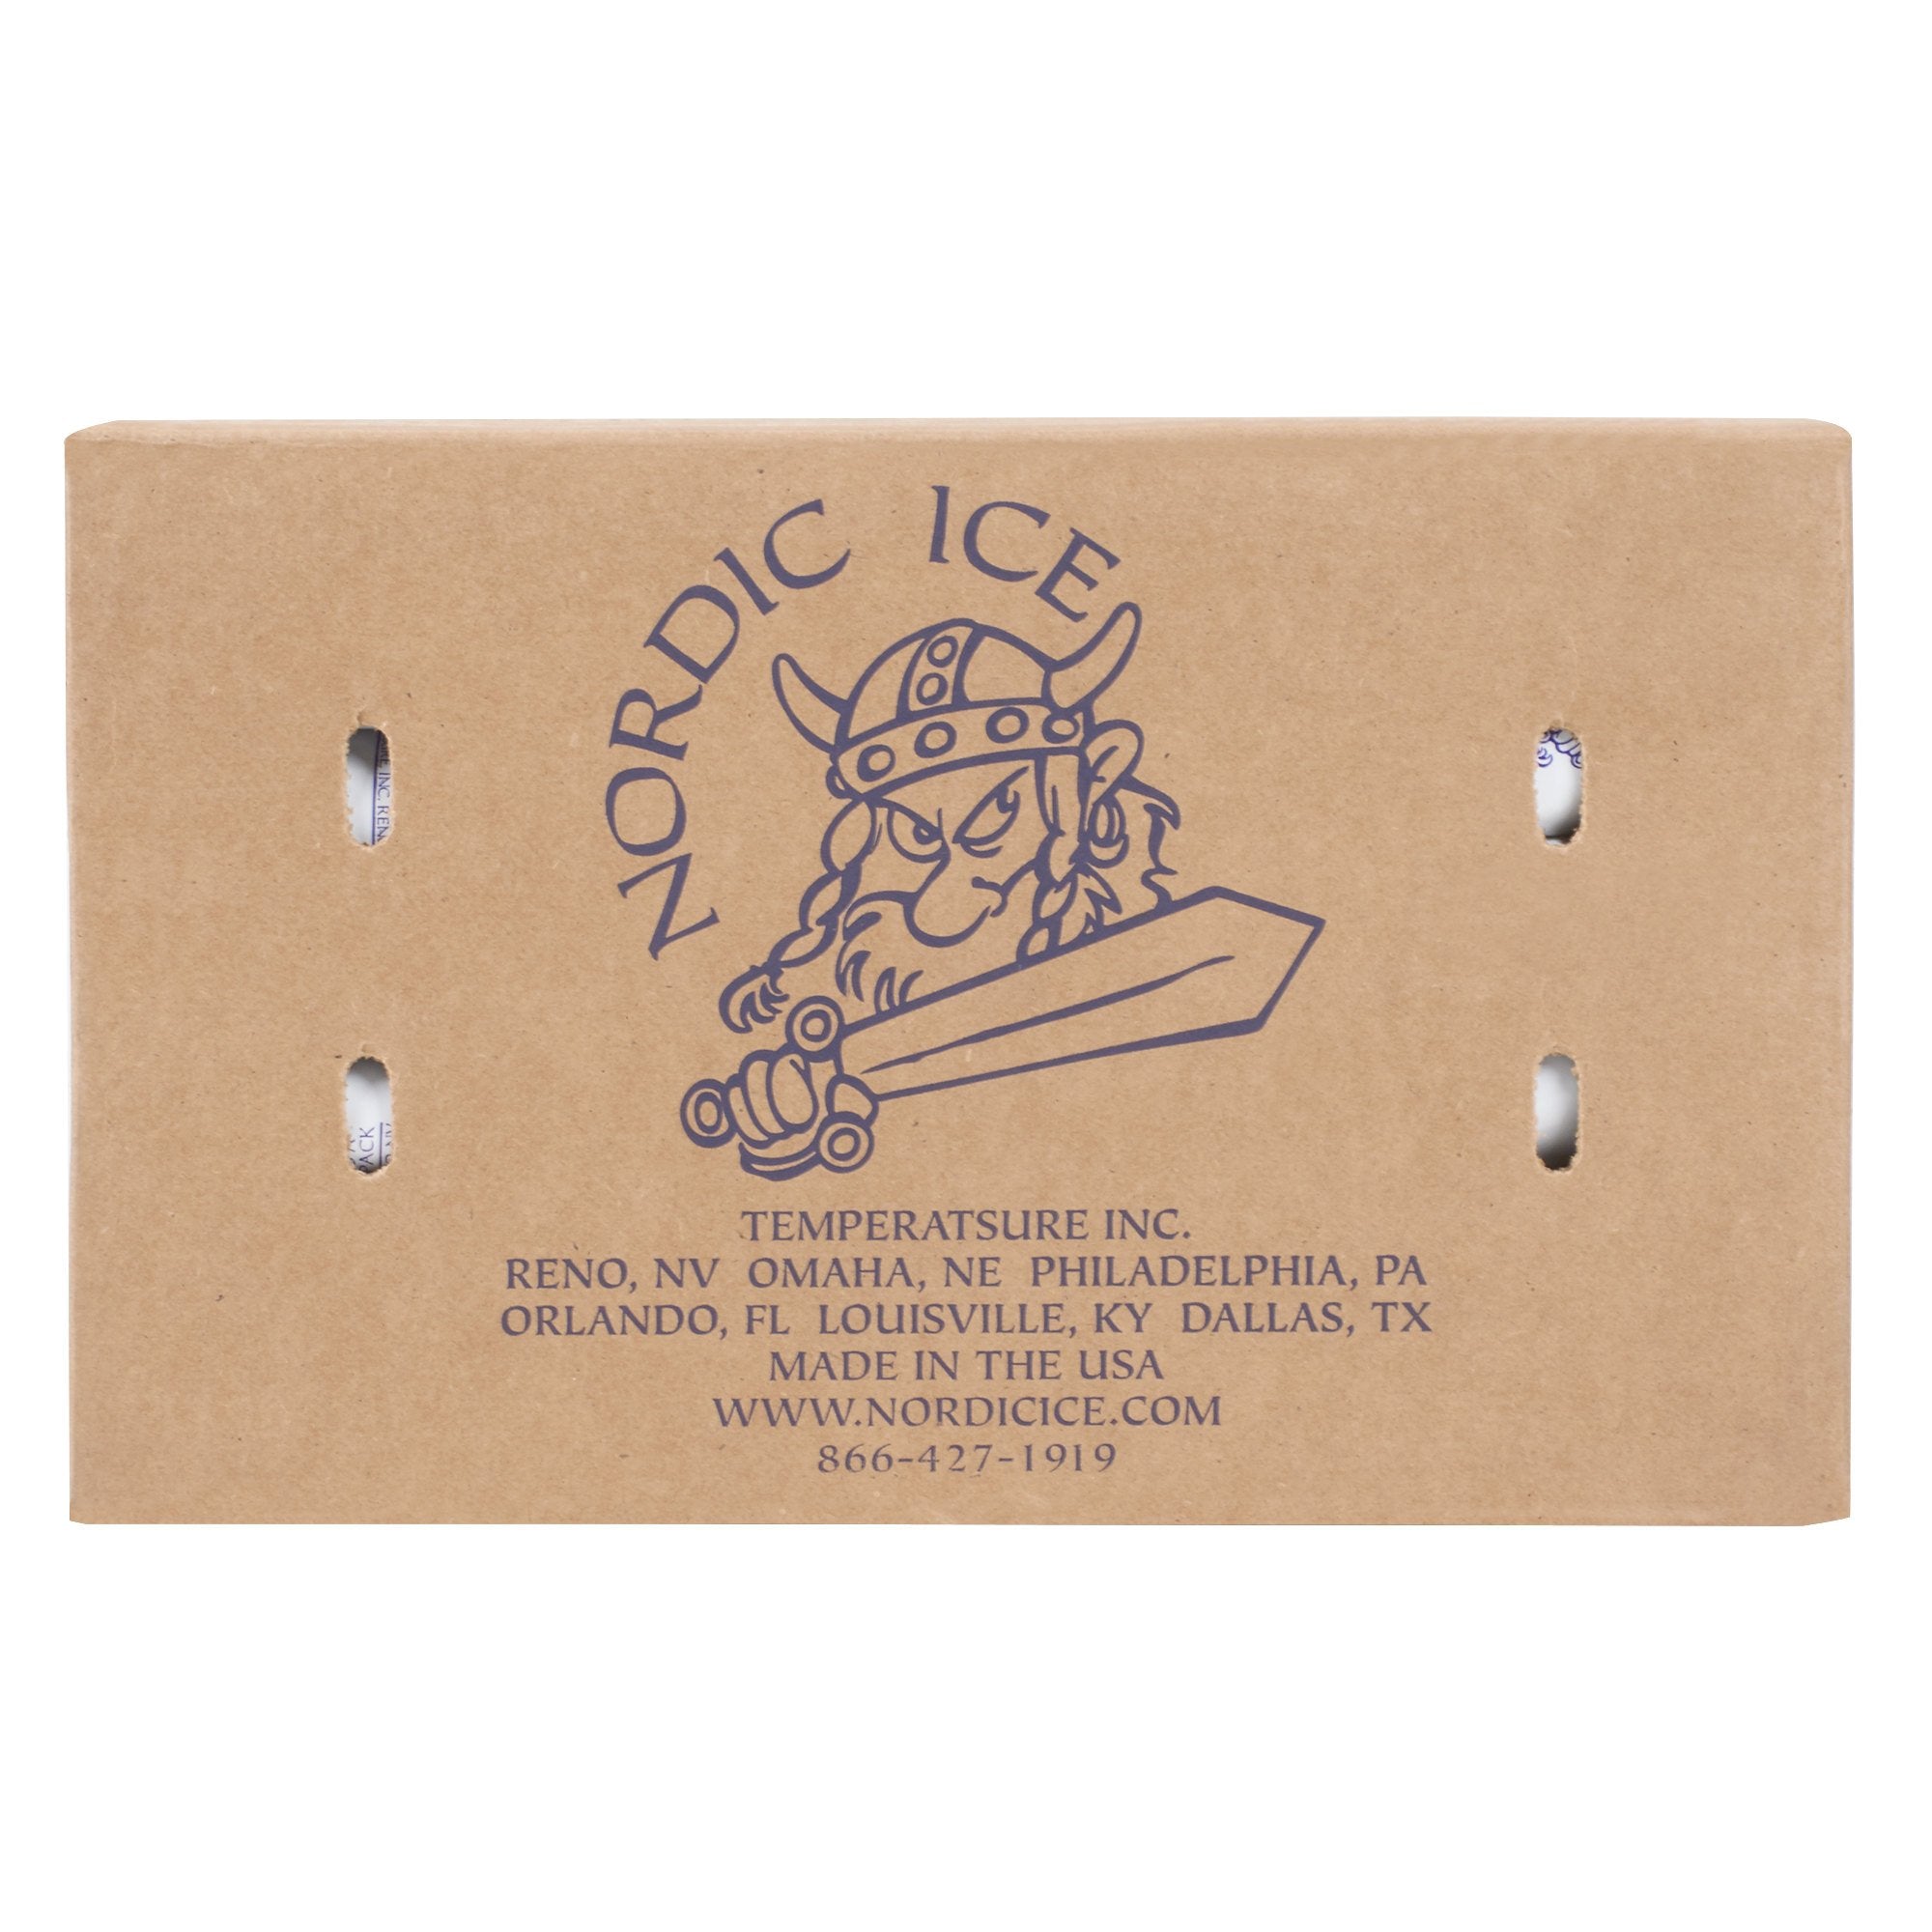 Refrigerant Gel Pack Nordic Ice 1-1/4 X 5-1/2 X 7-1/2 Inch, 24 oz. For Safe Transport of Food, Pharmaceuticals and Medical Products